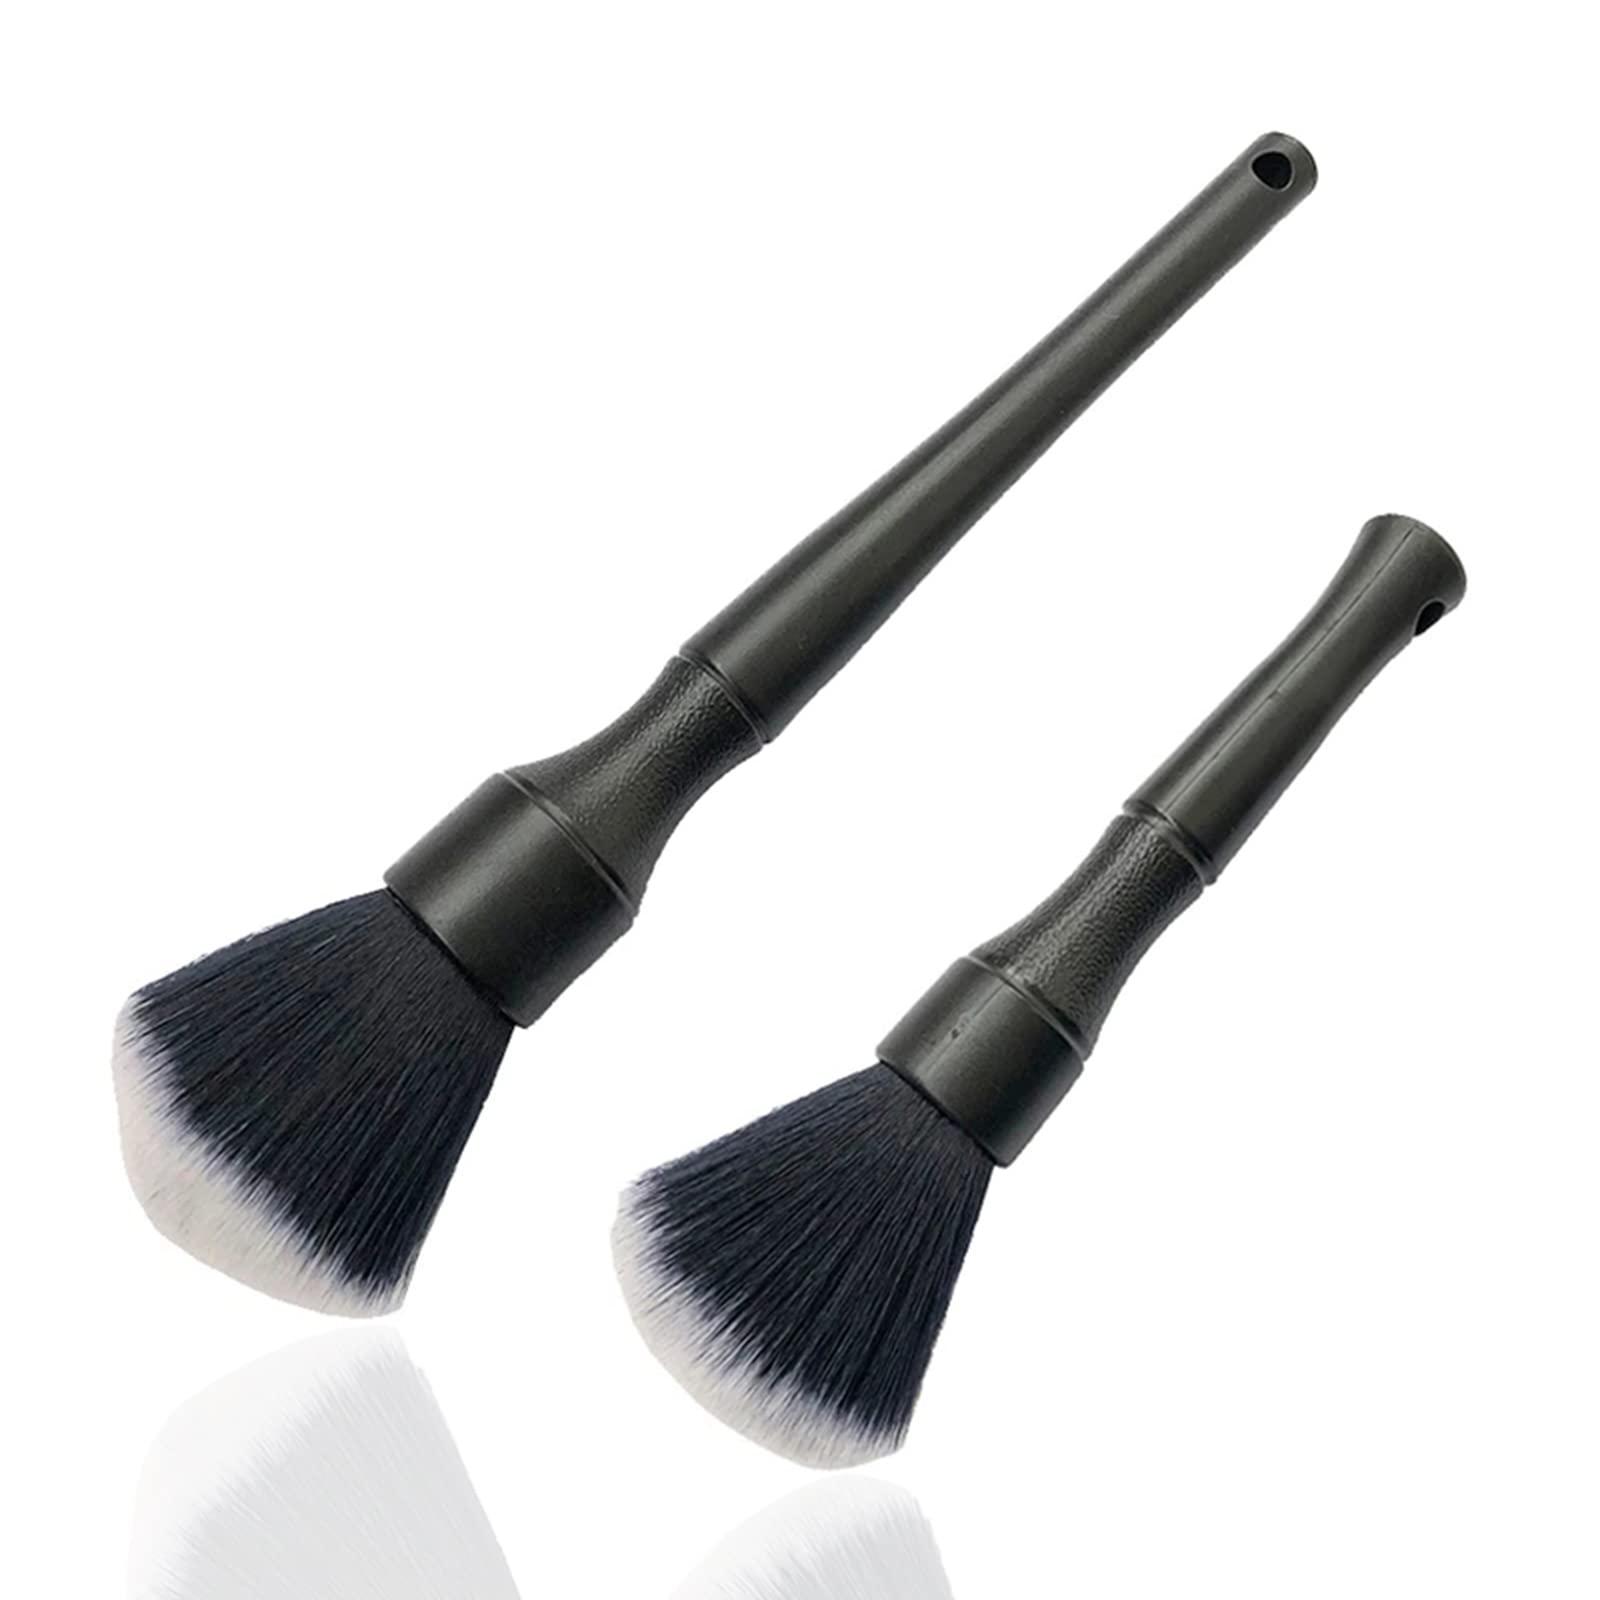 ALI2 Detailing Brush Set,Soft Comfortable Grip for Car Interior and Exterior Detailing Cleaning,Black 0